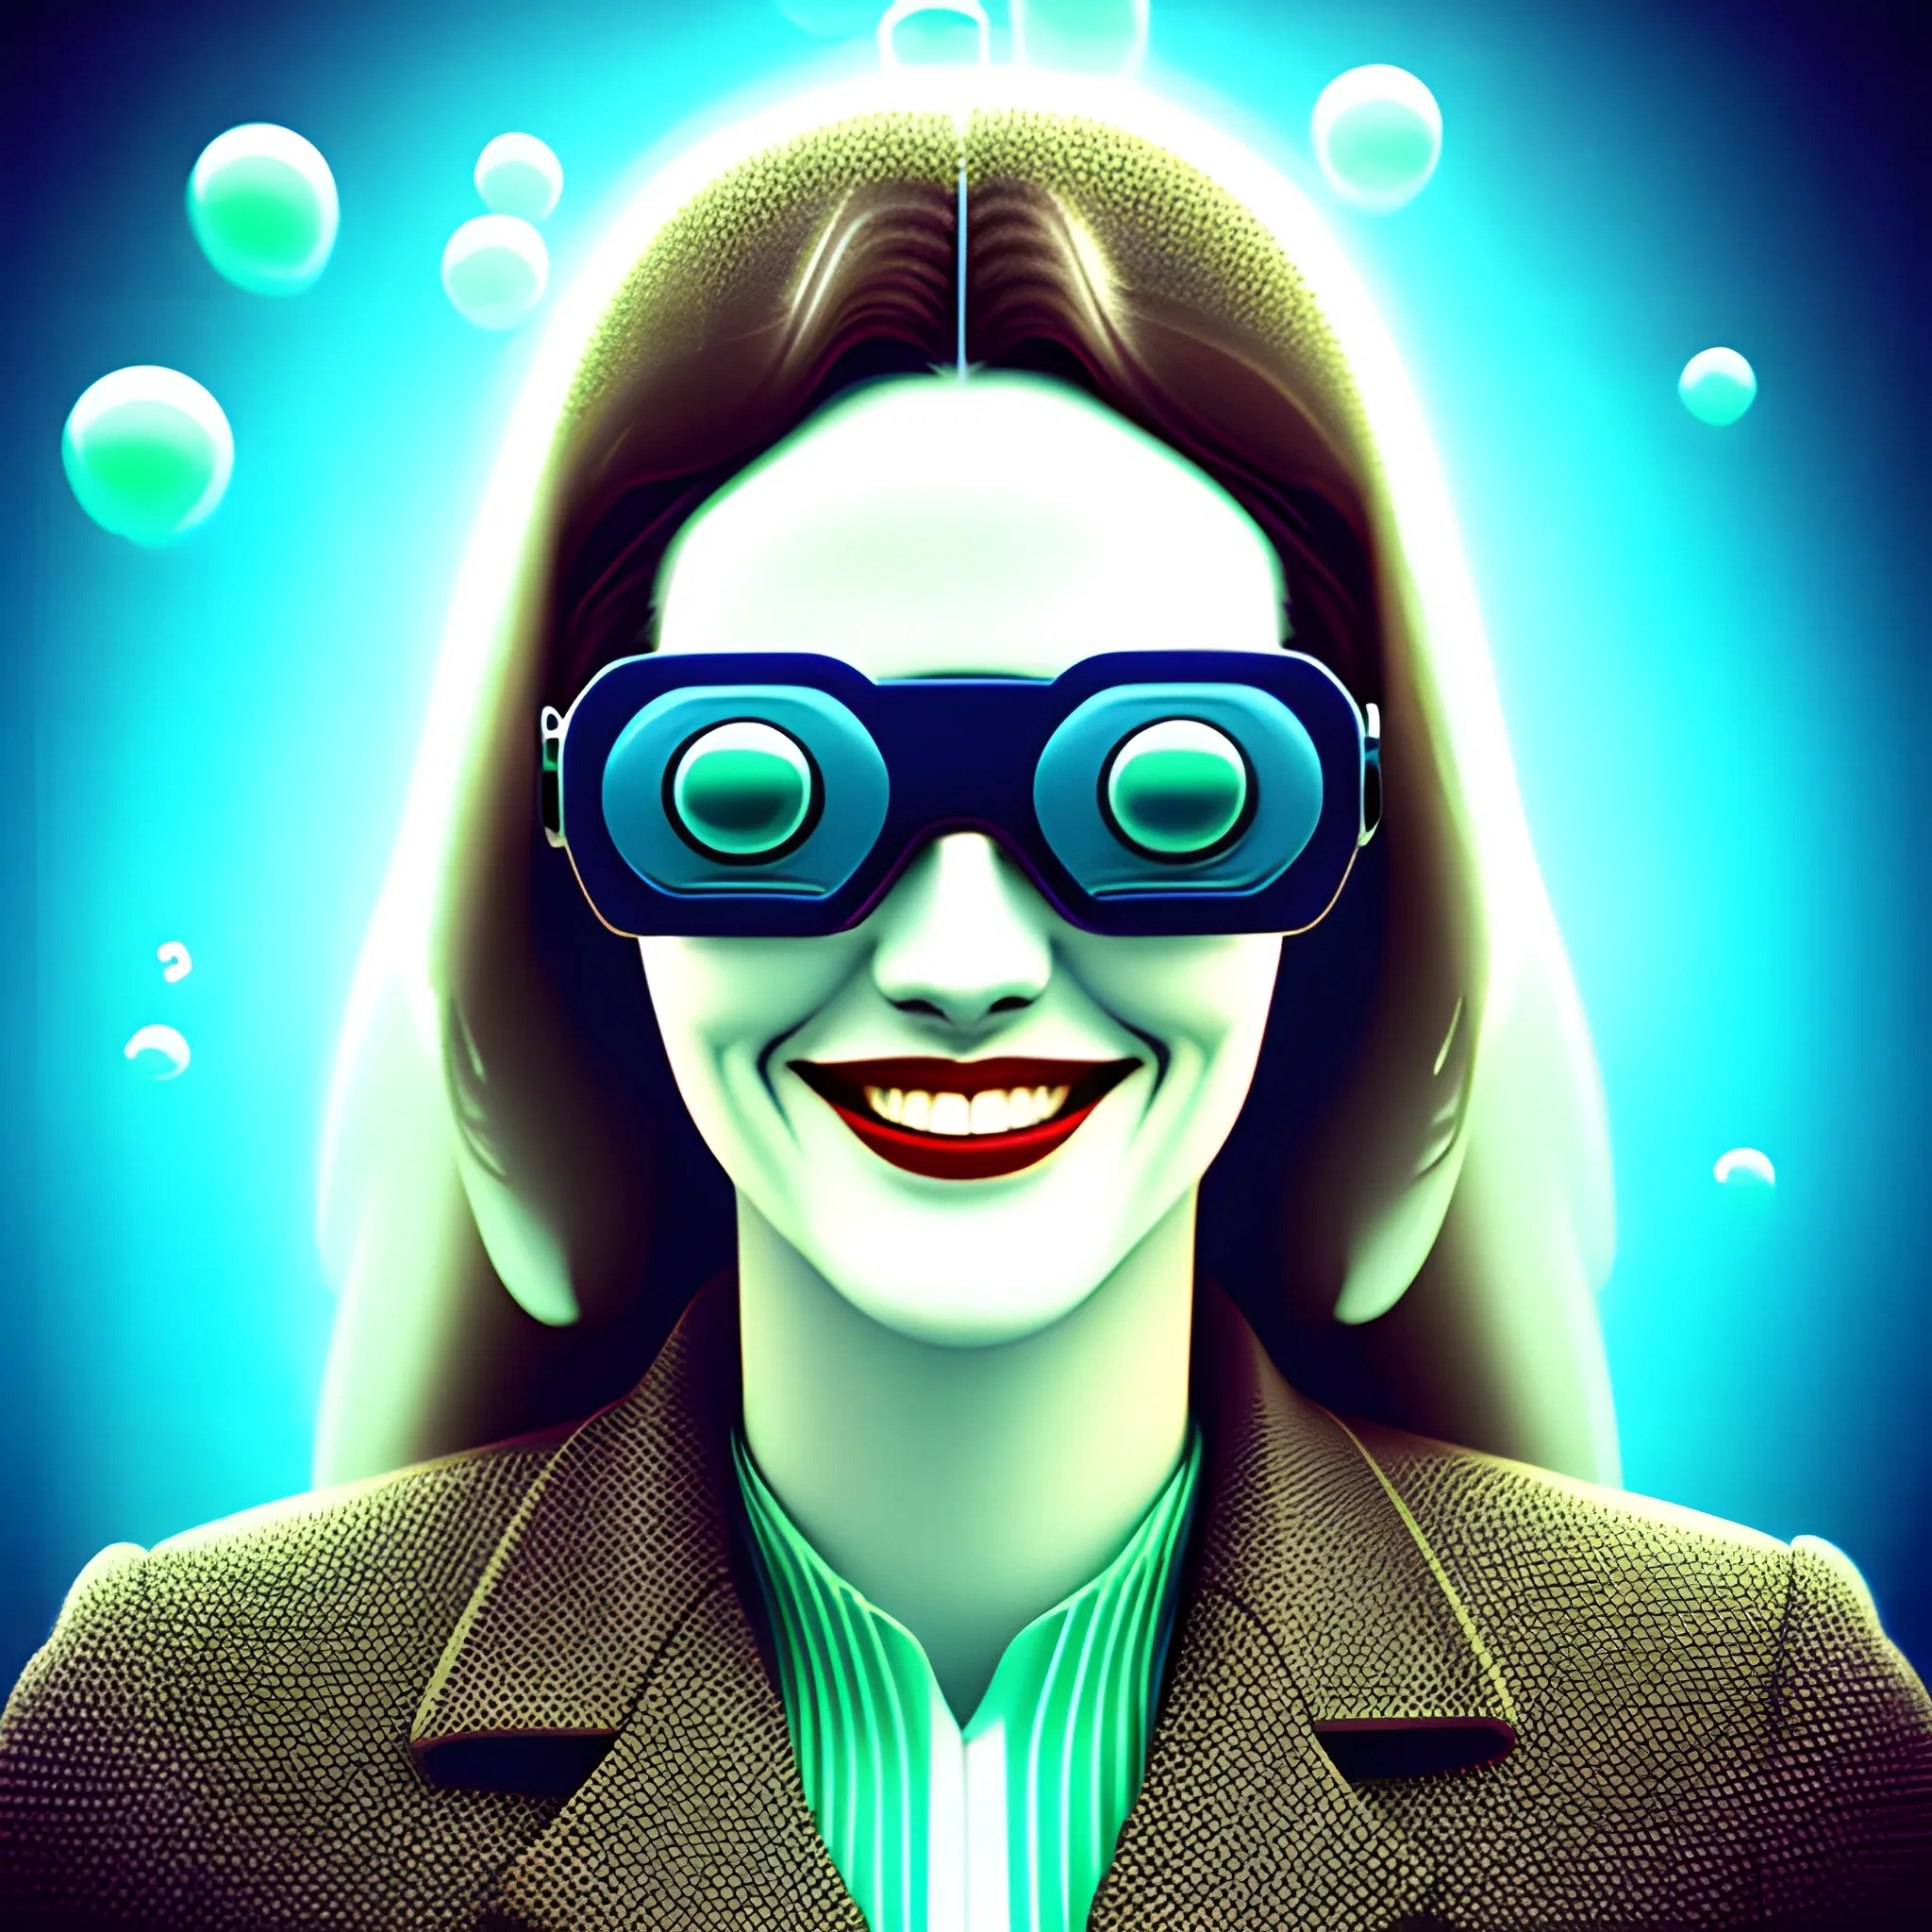 Friendly wise young high-tech female government worker. Should be warm, cheerful, knowledgeable, and smiling.  underwater bubbly clouds, Anaglyph 3D lens blur effect
